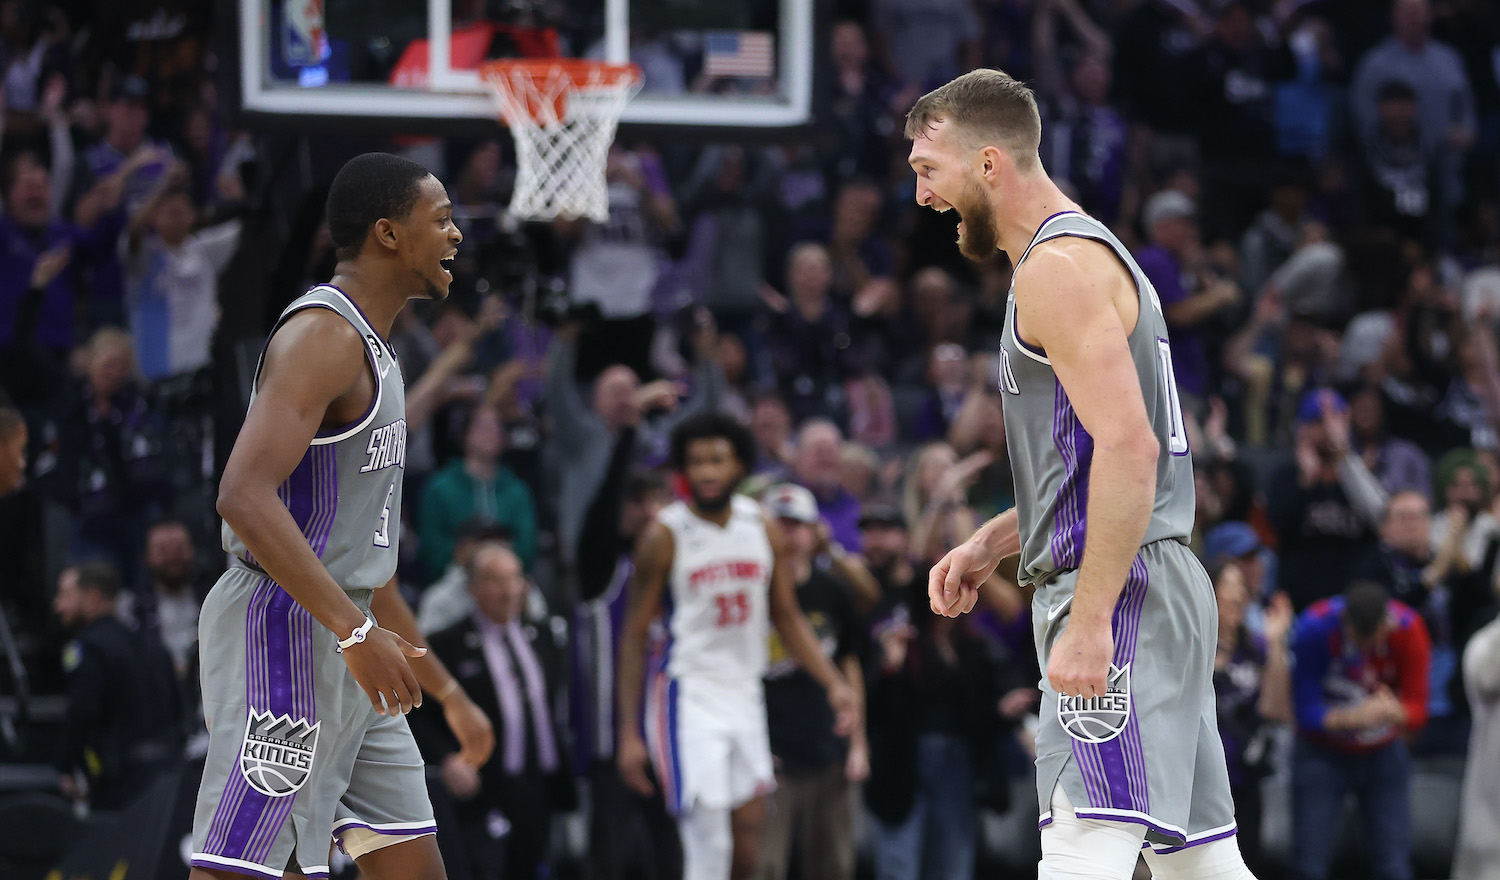 SACRAMENTO, CALIFORNIA - NOVEMBER 20: De'Aaron Fox #5 and Domantas Sabonis #10 of the Sacramento Kings celebrate after a three-point basket in the fourth quarter against the Detroit Pistons at Golden 1 Center on November 20, 2022 in Sacramento, California. NOTE TO USER: User expressly acknowledges and agrees that, by downloading and/or using this photograph, User is consenting to the terms and conditions of the Getty Images License Agreement. (Photo by Lachlan Cunningham/Getty Images)